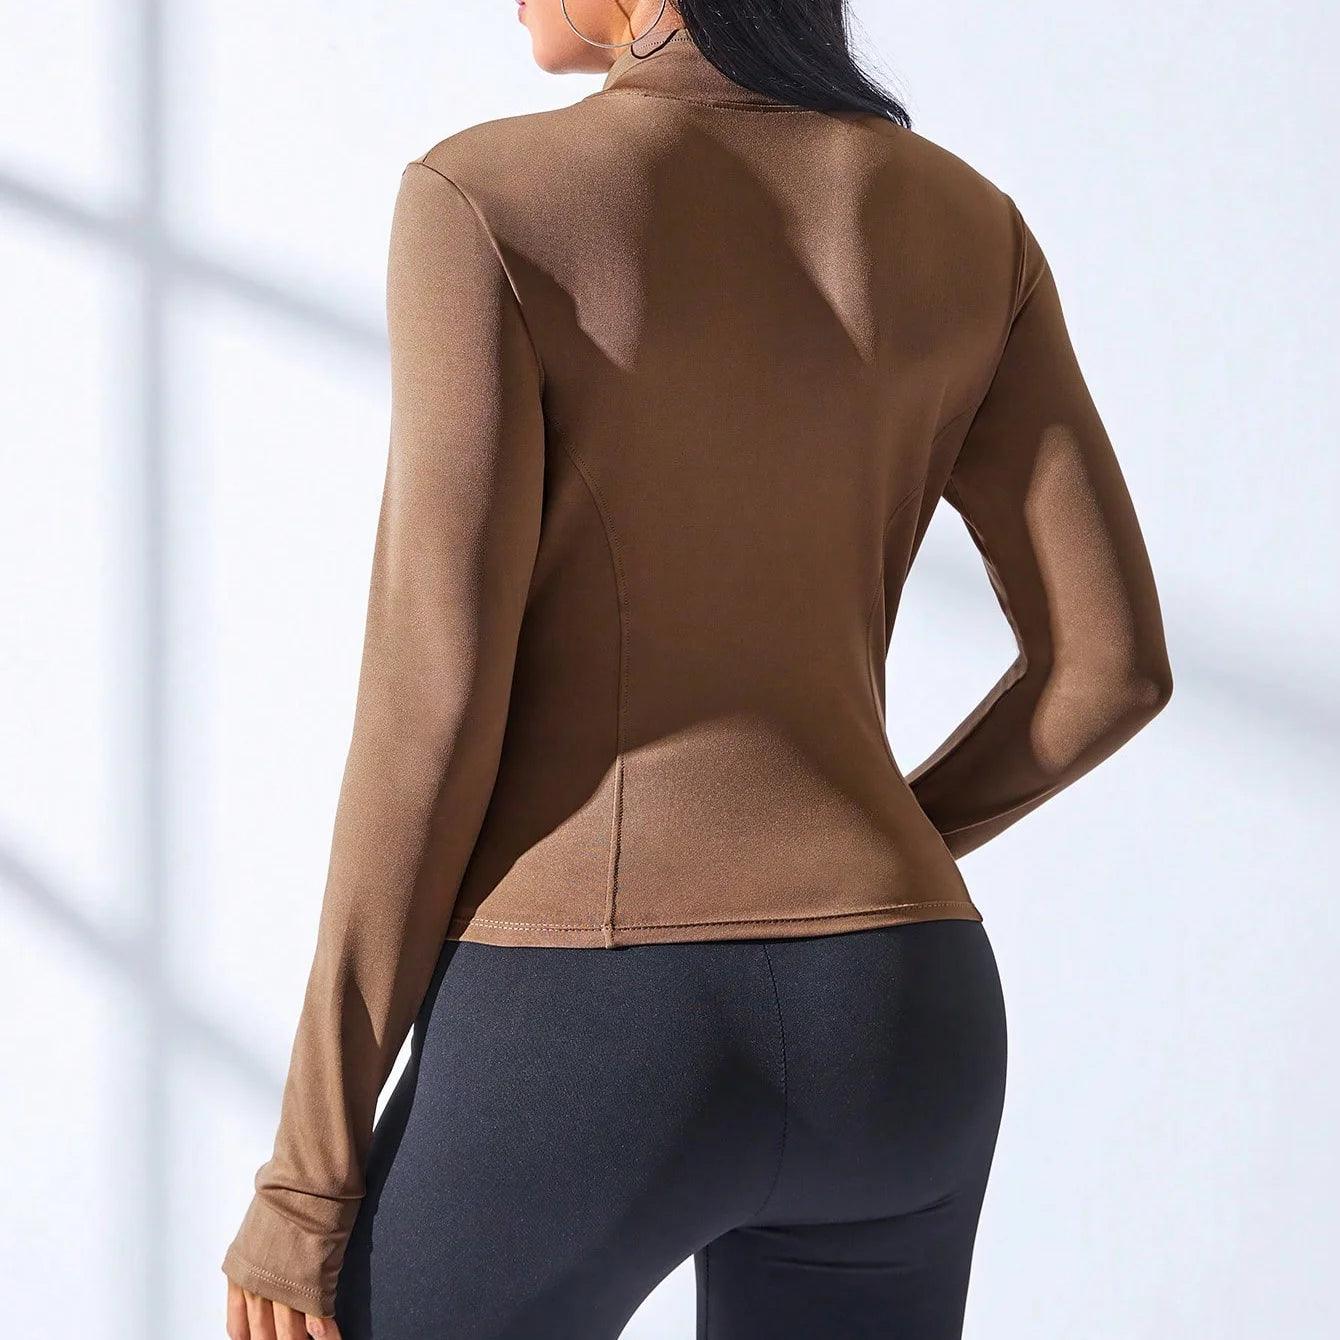 Performance-Enhancing Women's Slim Fit Training Jacket for Yoga, Running, and Sports  ourlum.com   